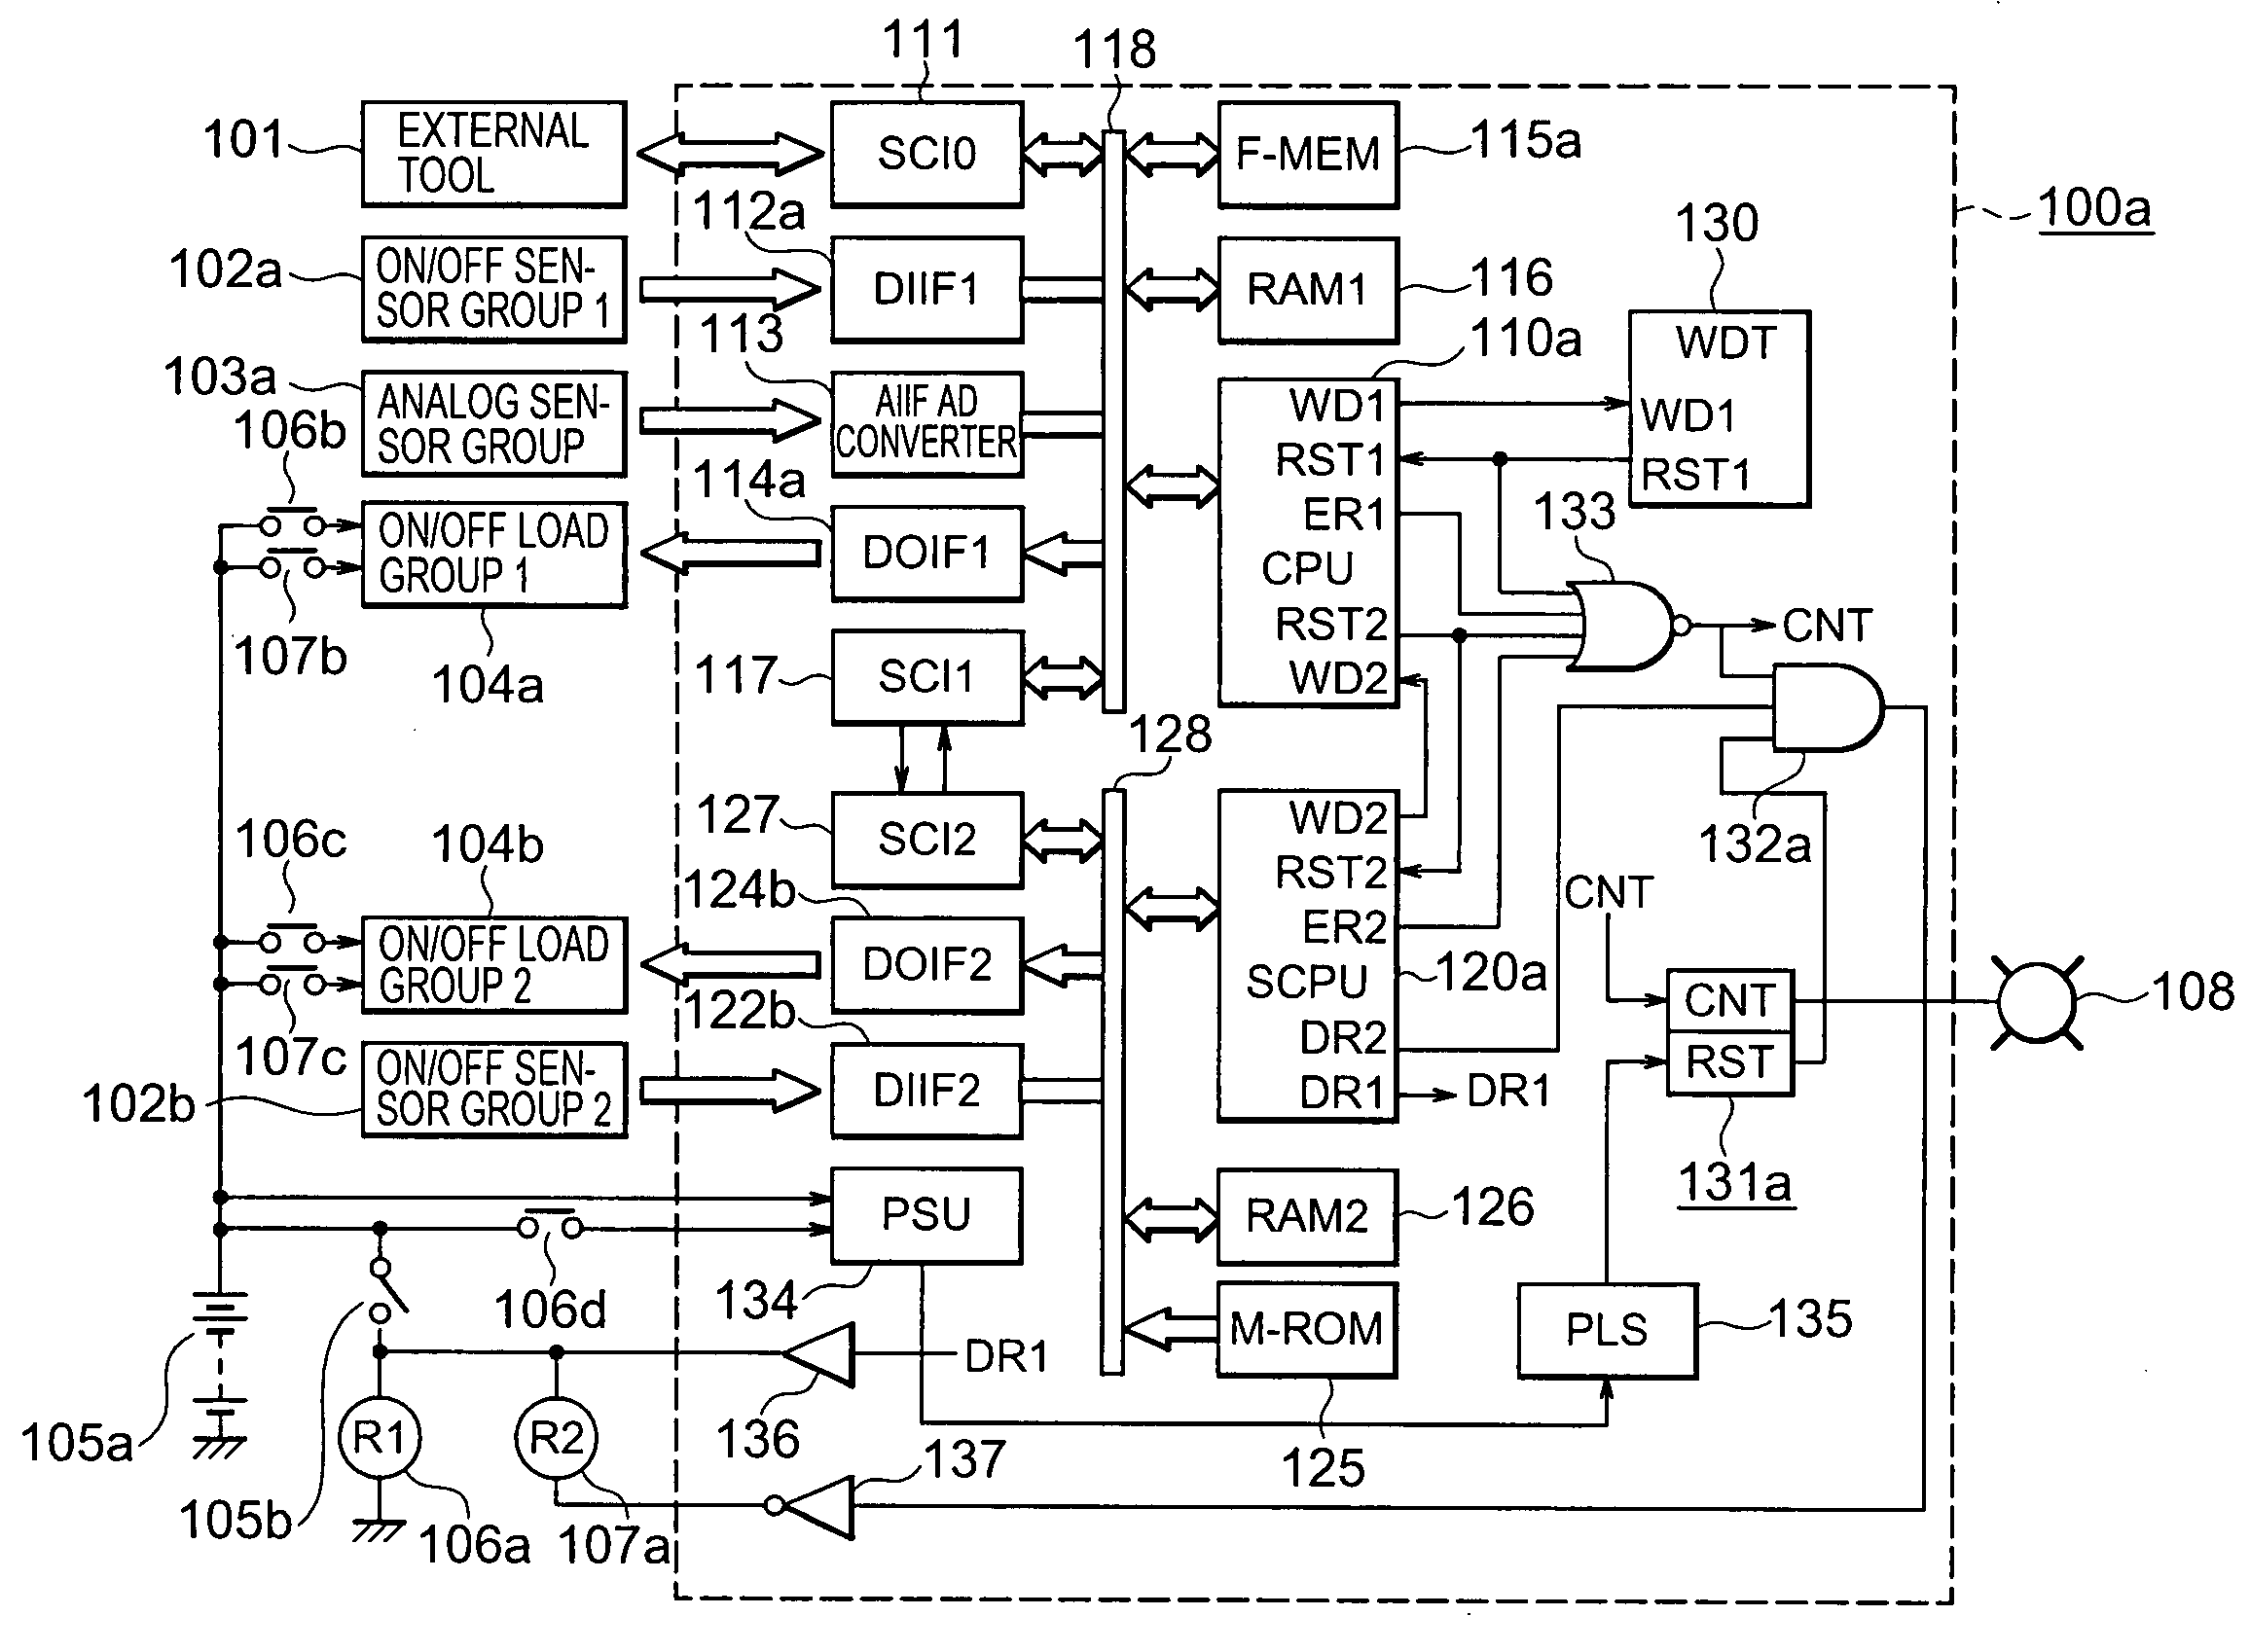 On-vehicle electronic control device